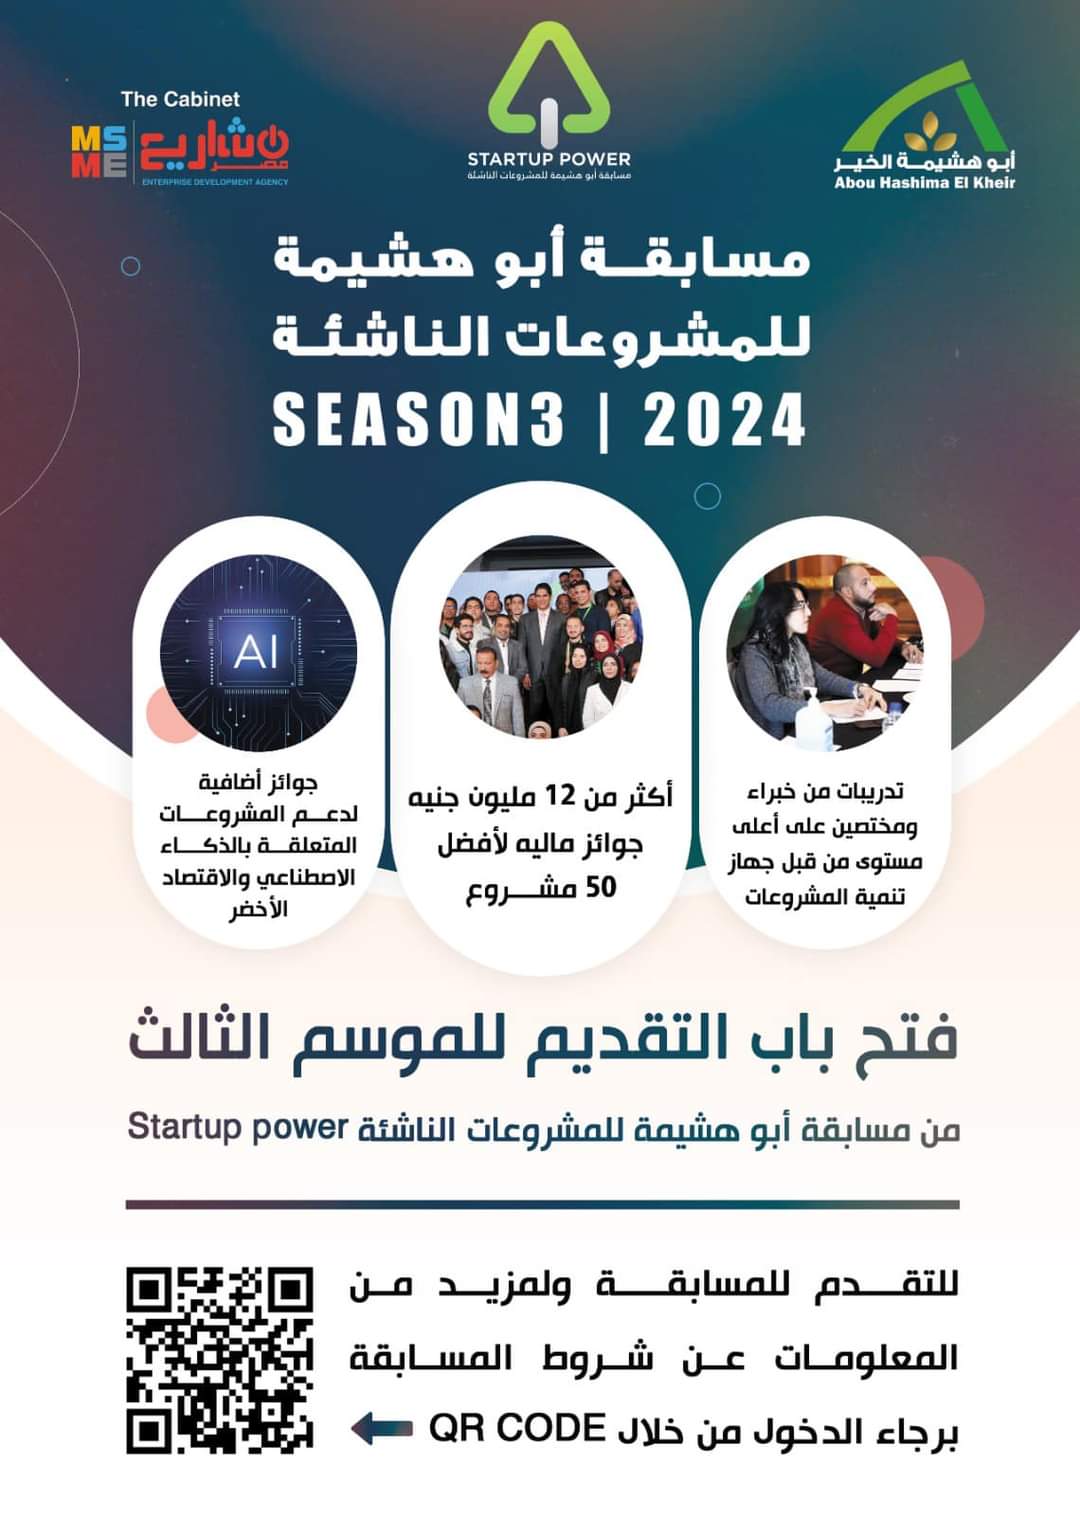 Applications are open for the third season of the Abu Hashima Startup Competition